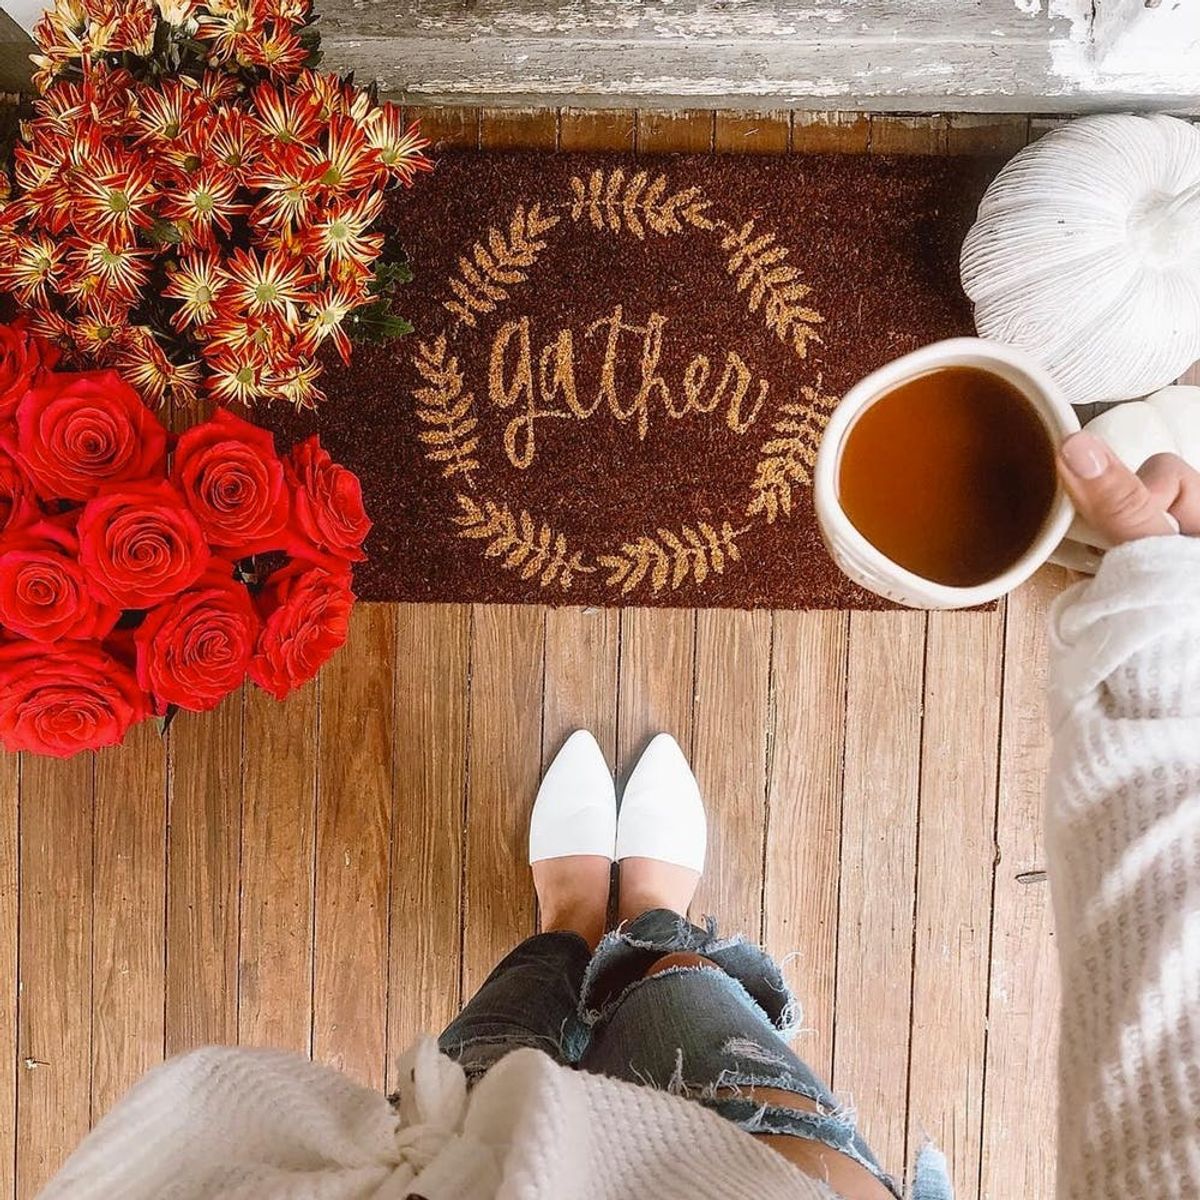 This New #Shoefie Trend Is All About Fall Decor